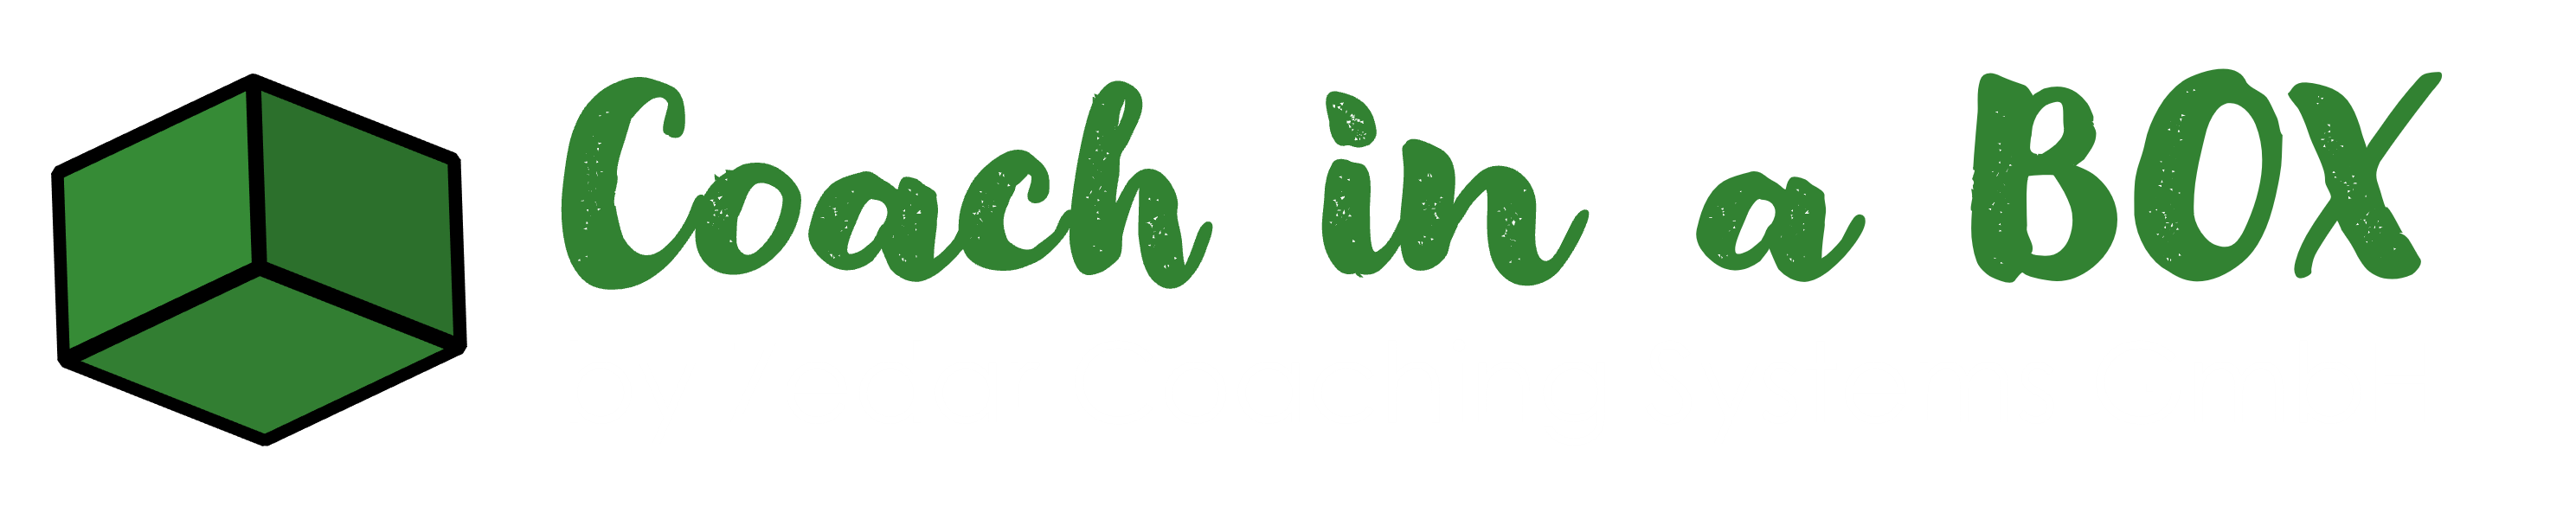 Coach in a BOX, by the company Zedar Coaching Systems GmbH